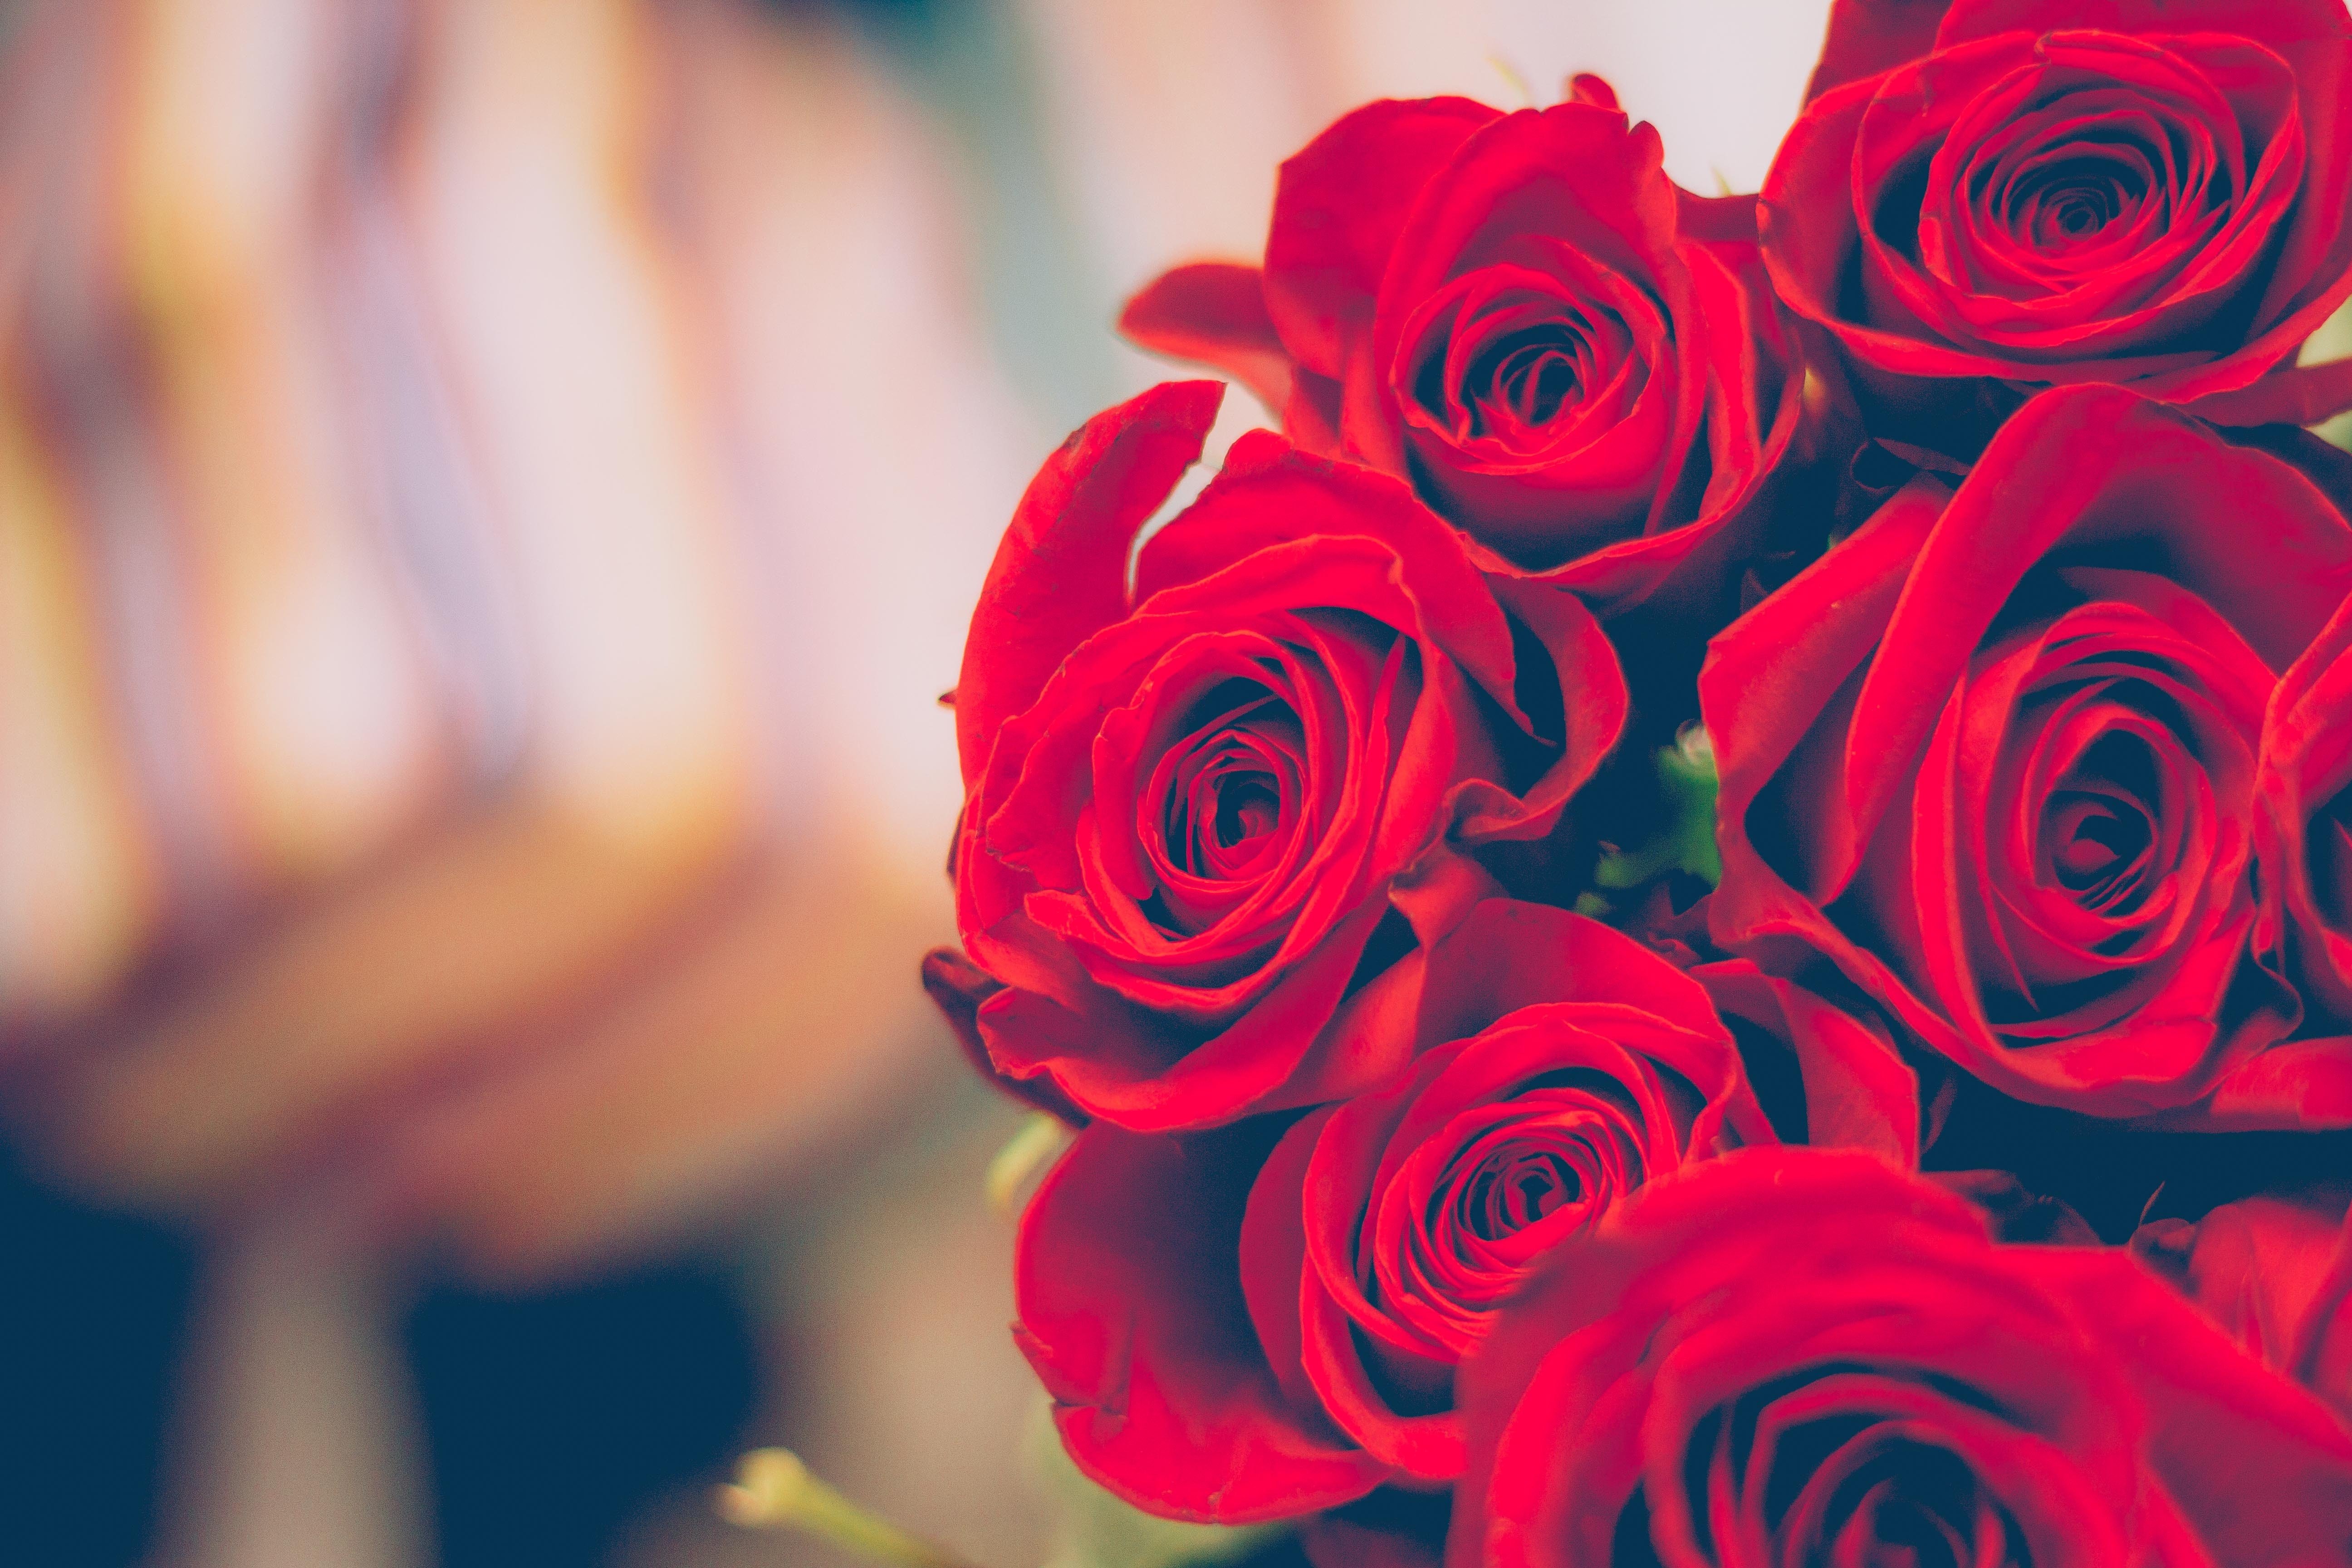 A bunch of roses. | Source: Pexels